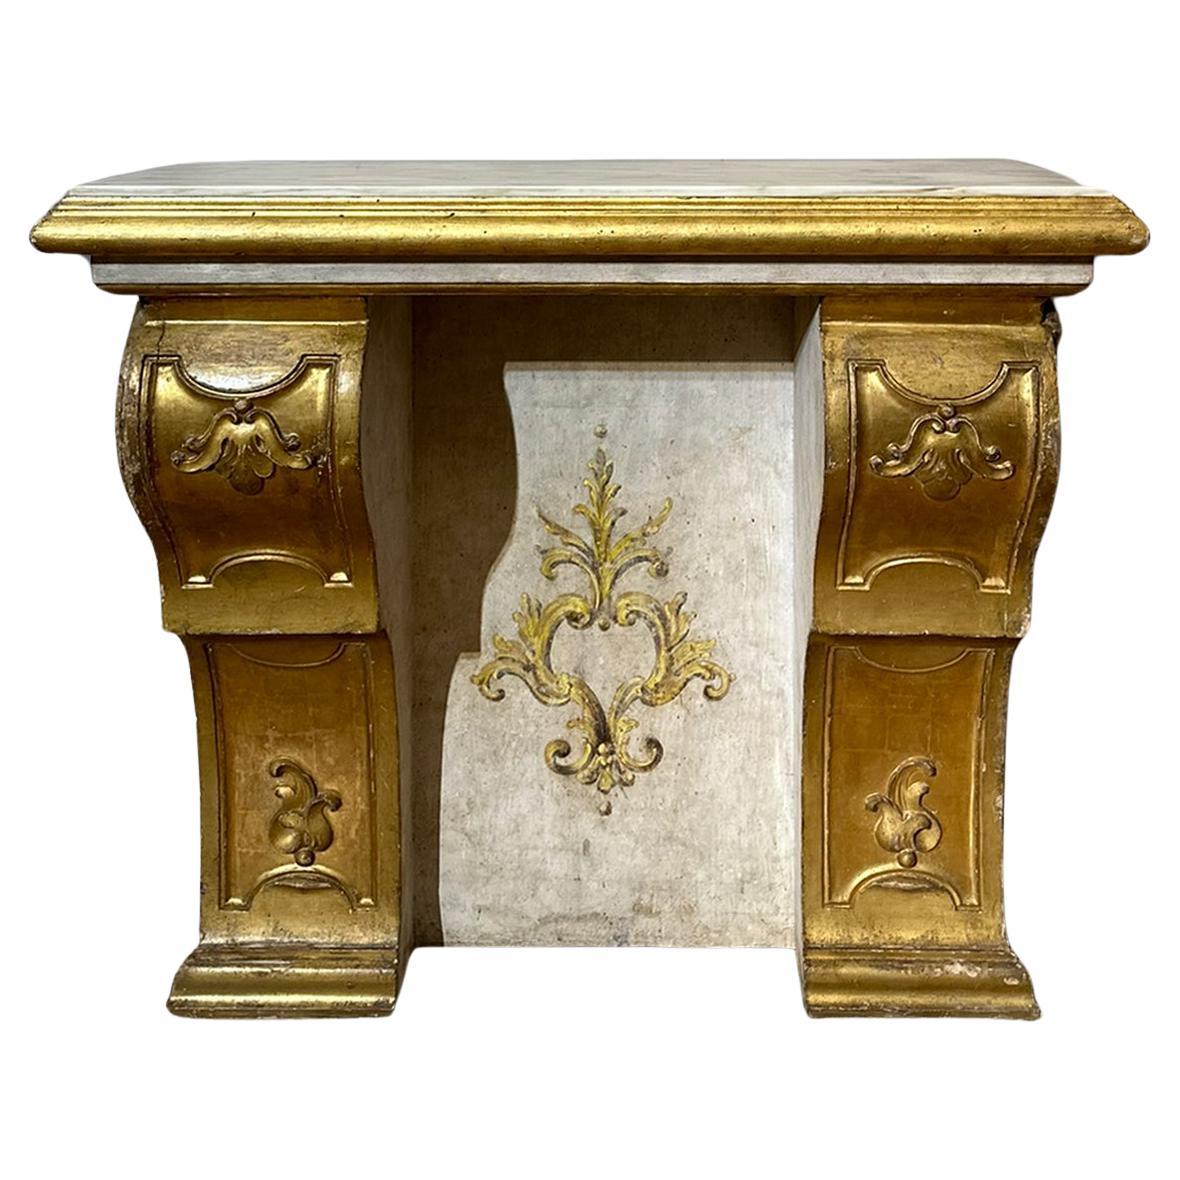 18th Centiry golden altar consolle